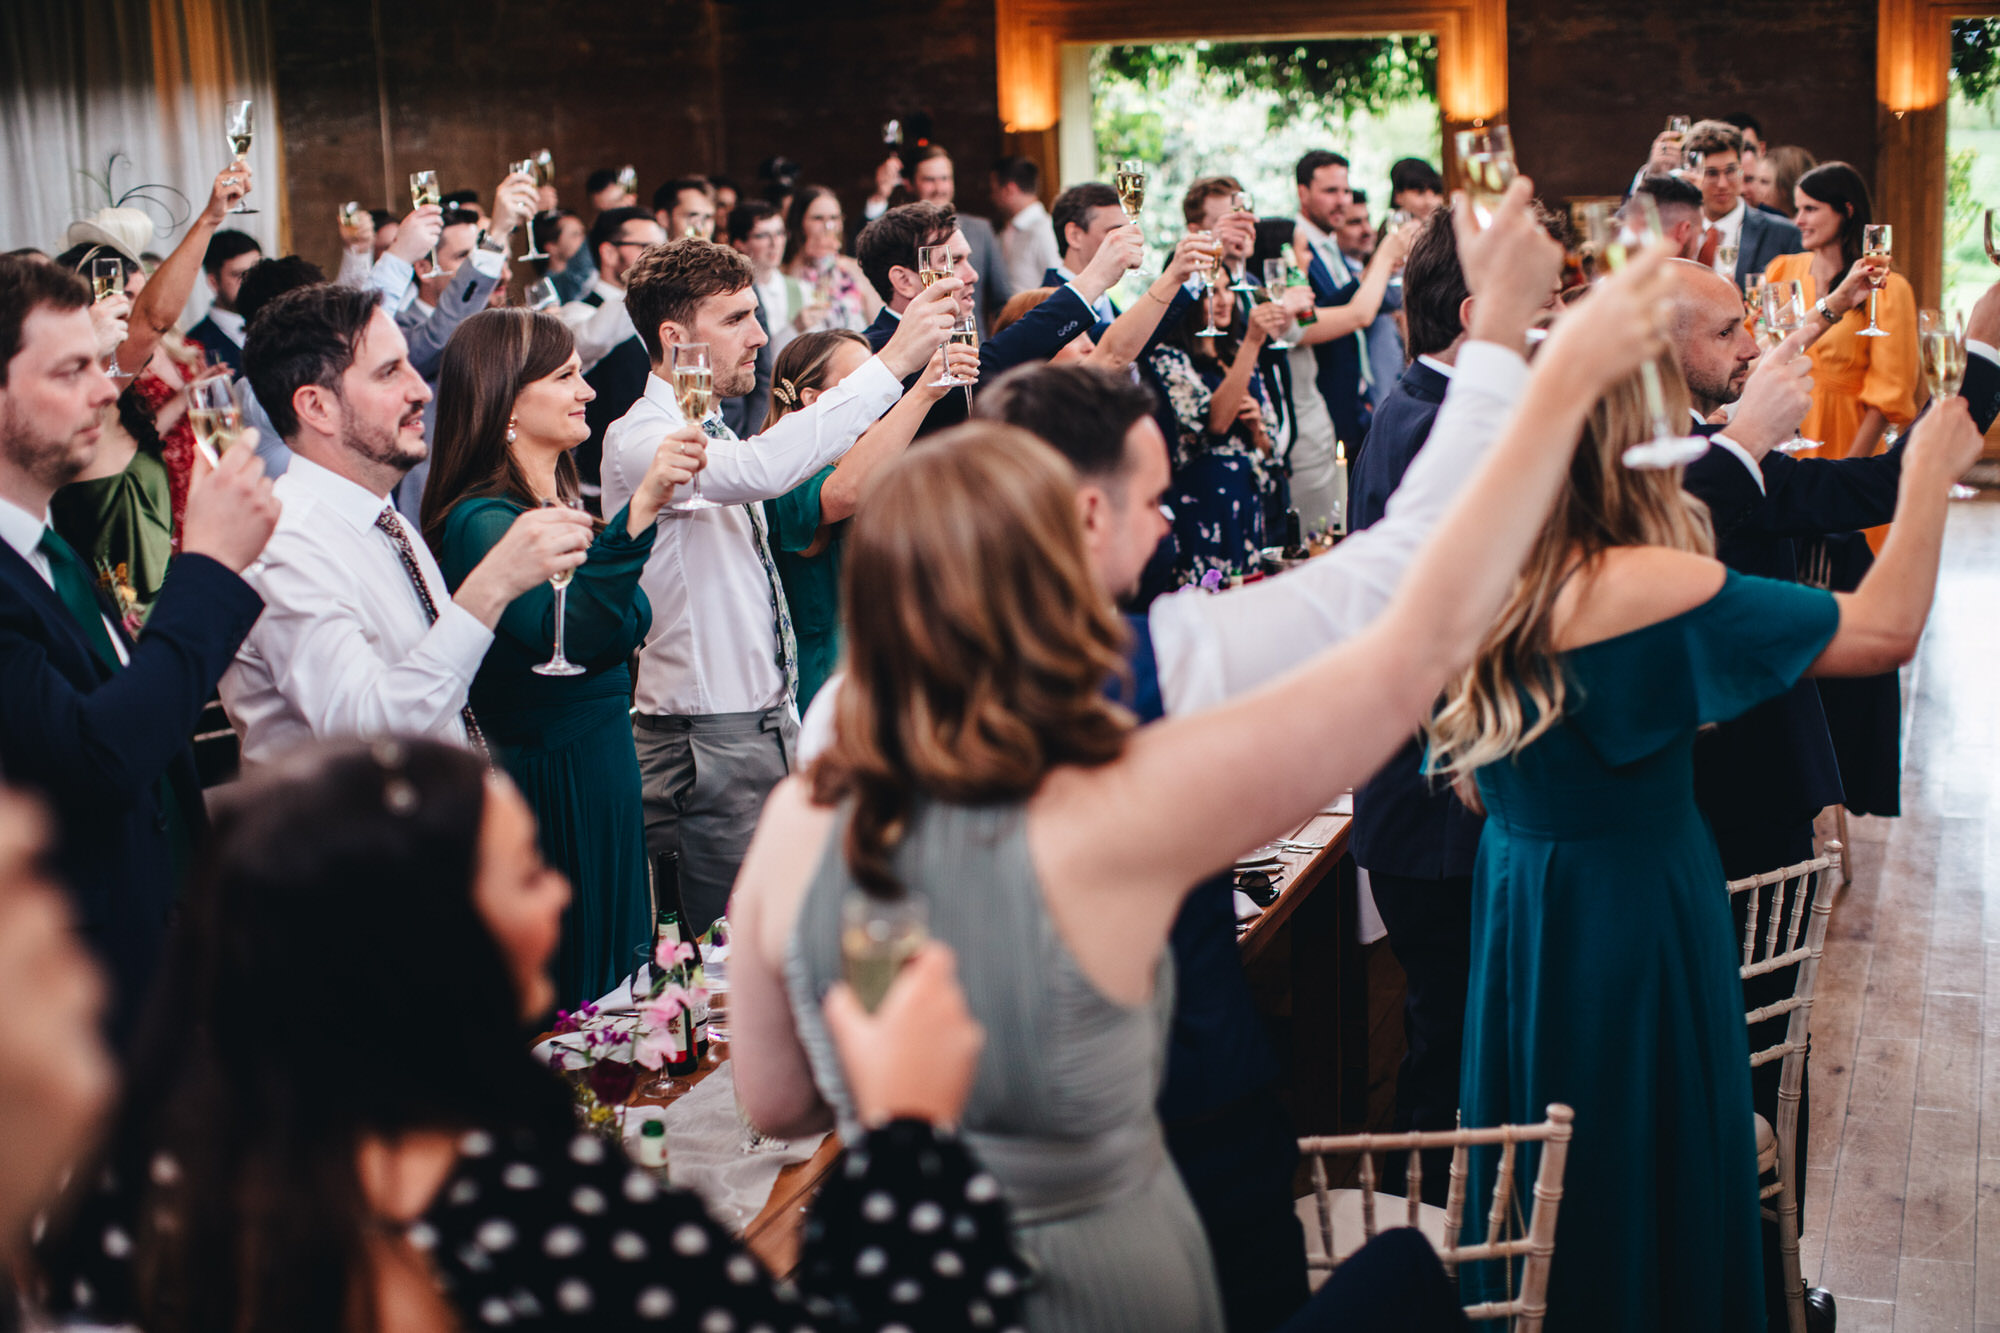 guests make wedding toast after speeches, raising glasses of champagne